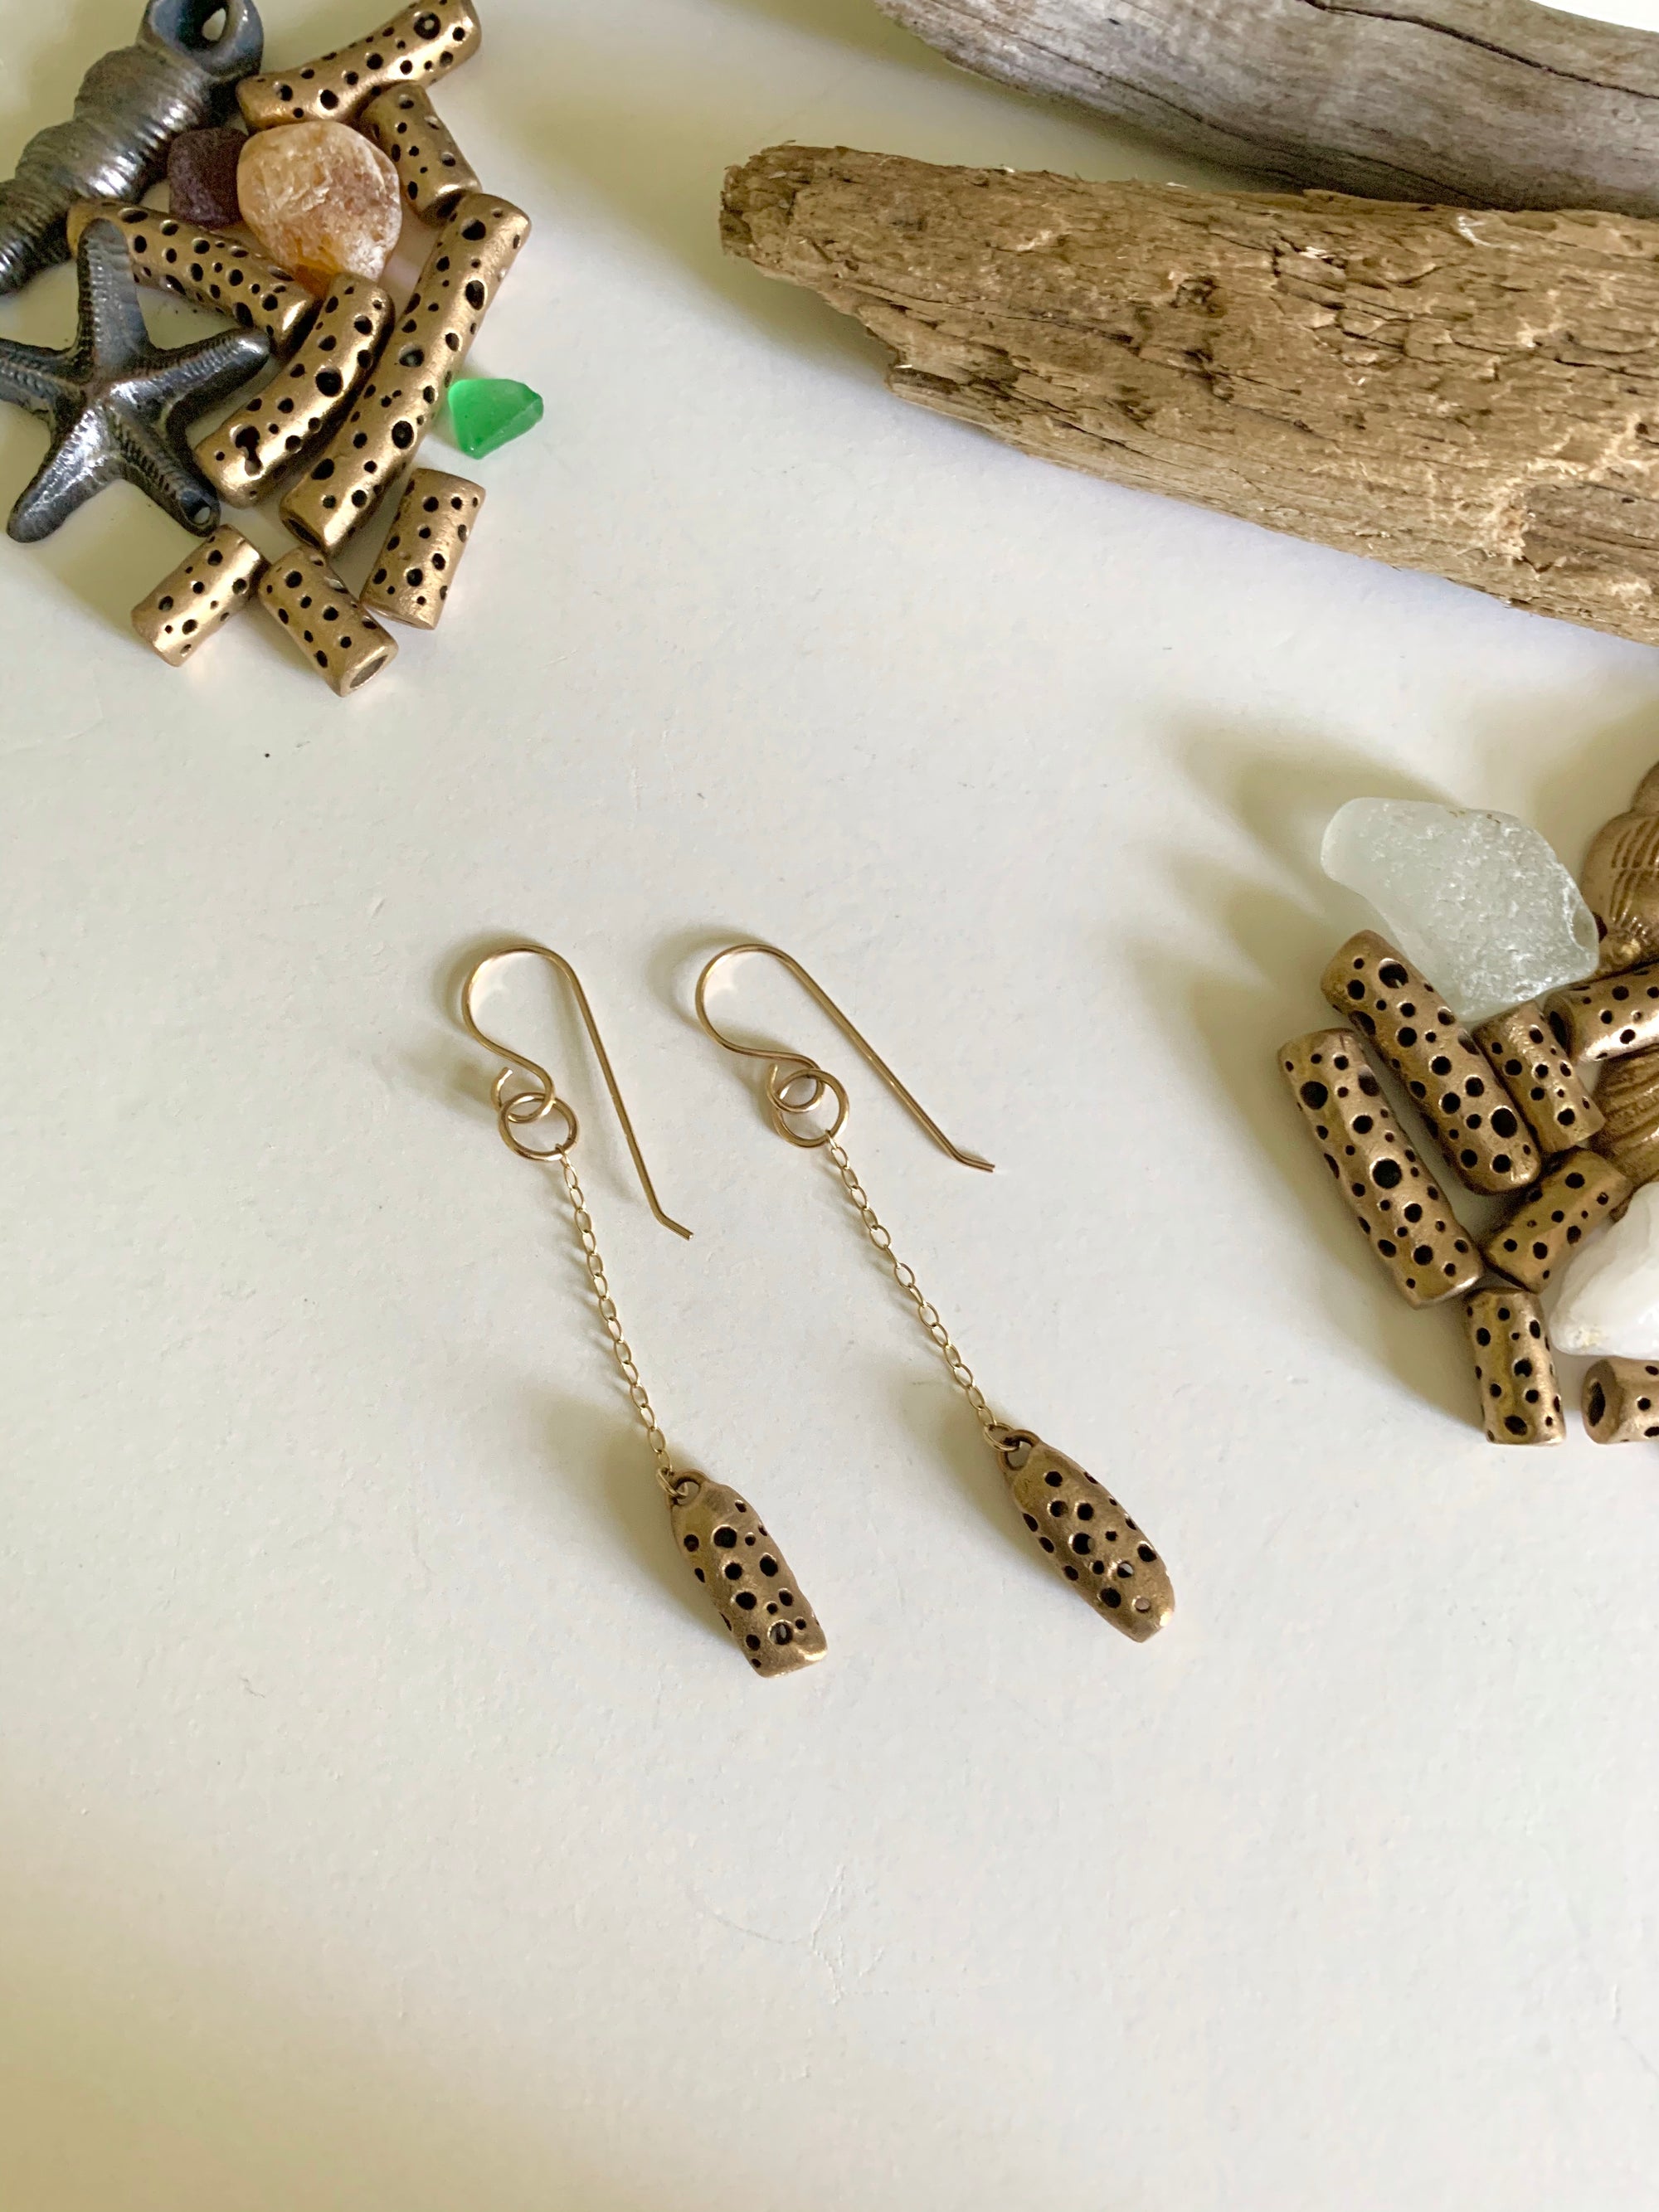 Summertime and the {bronze} earrings are easy